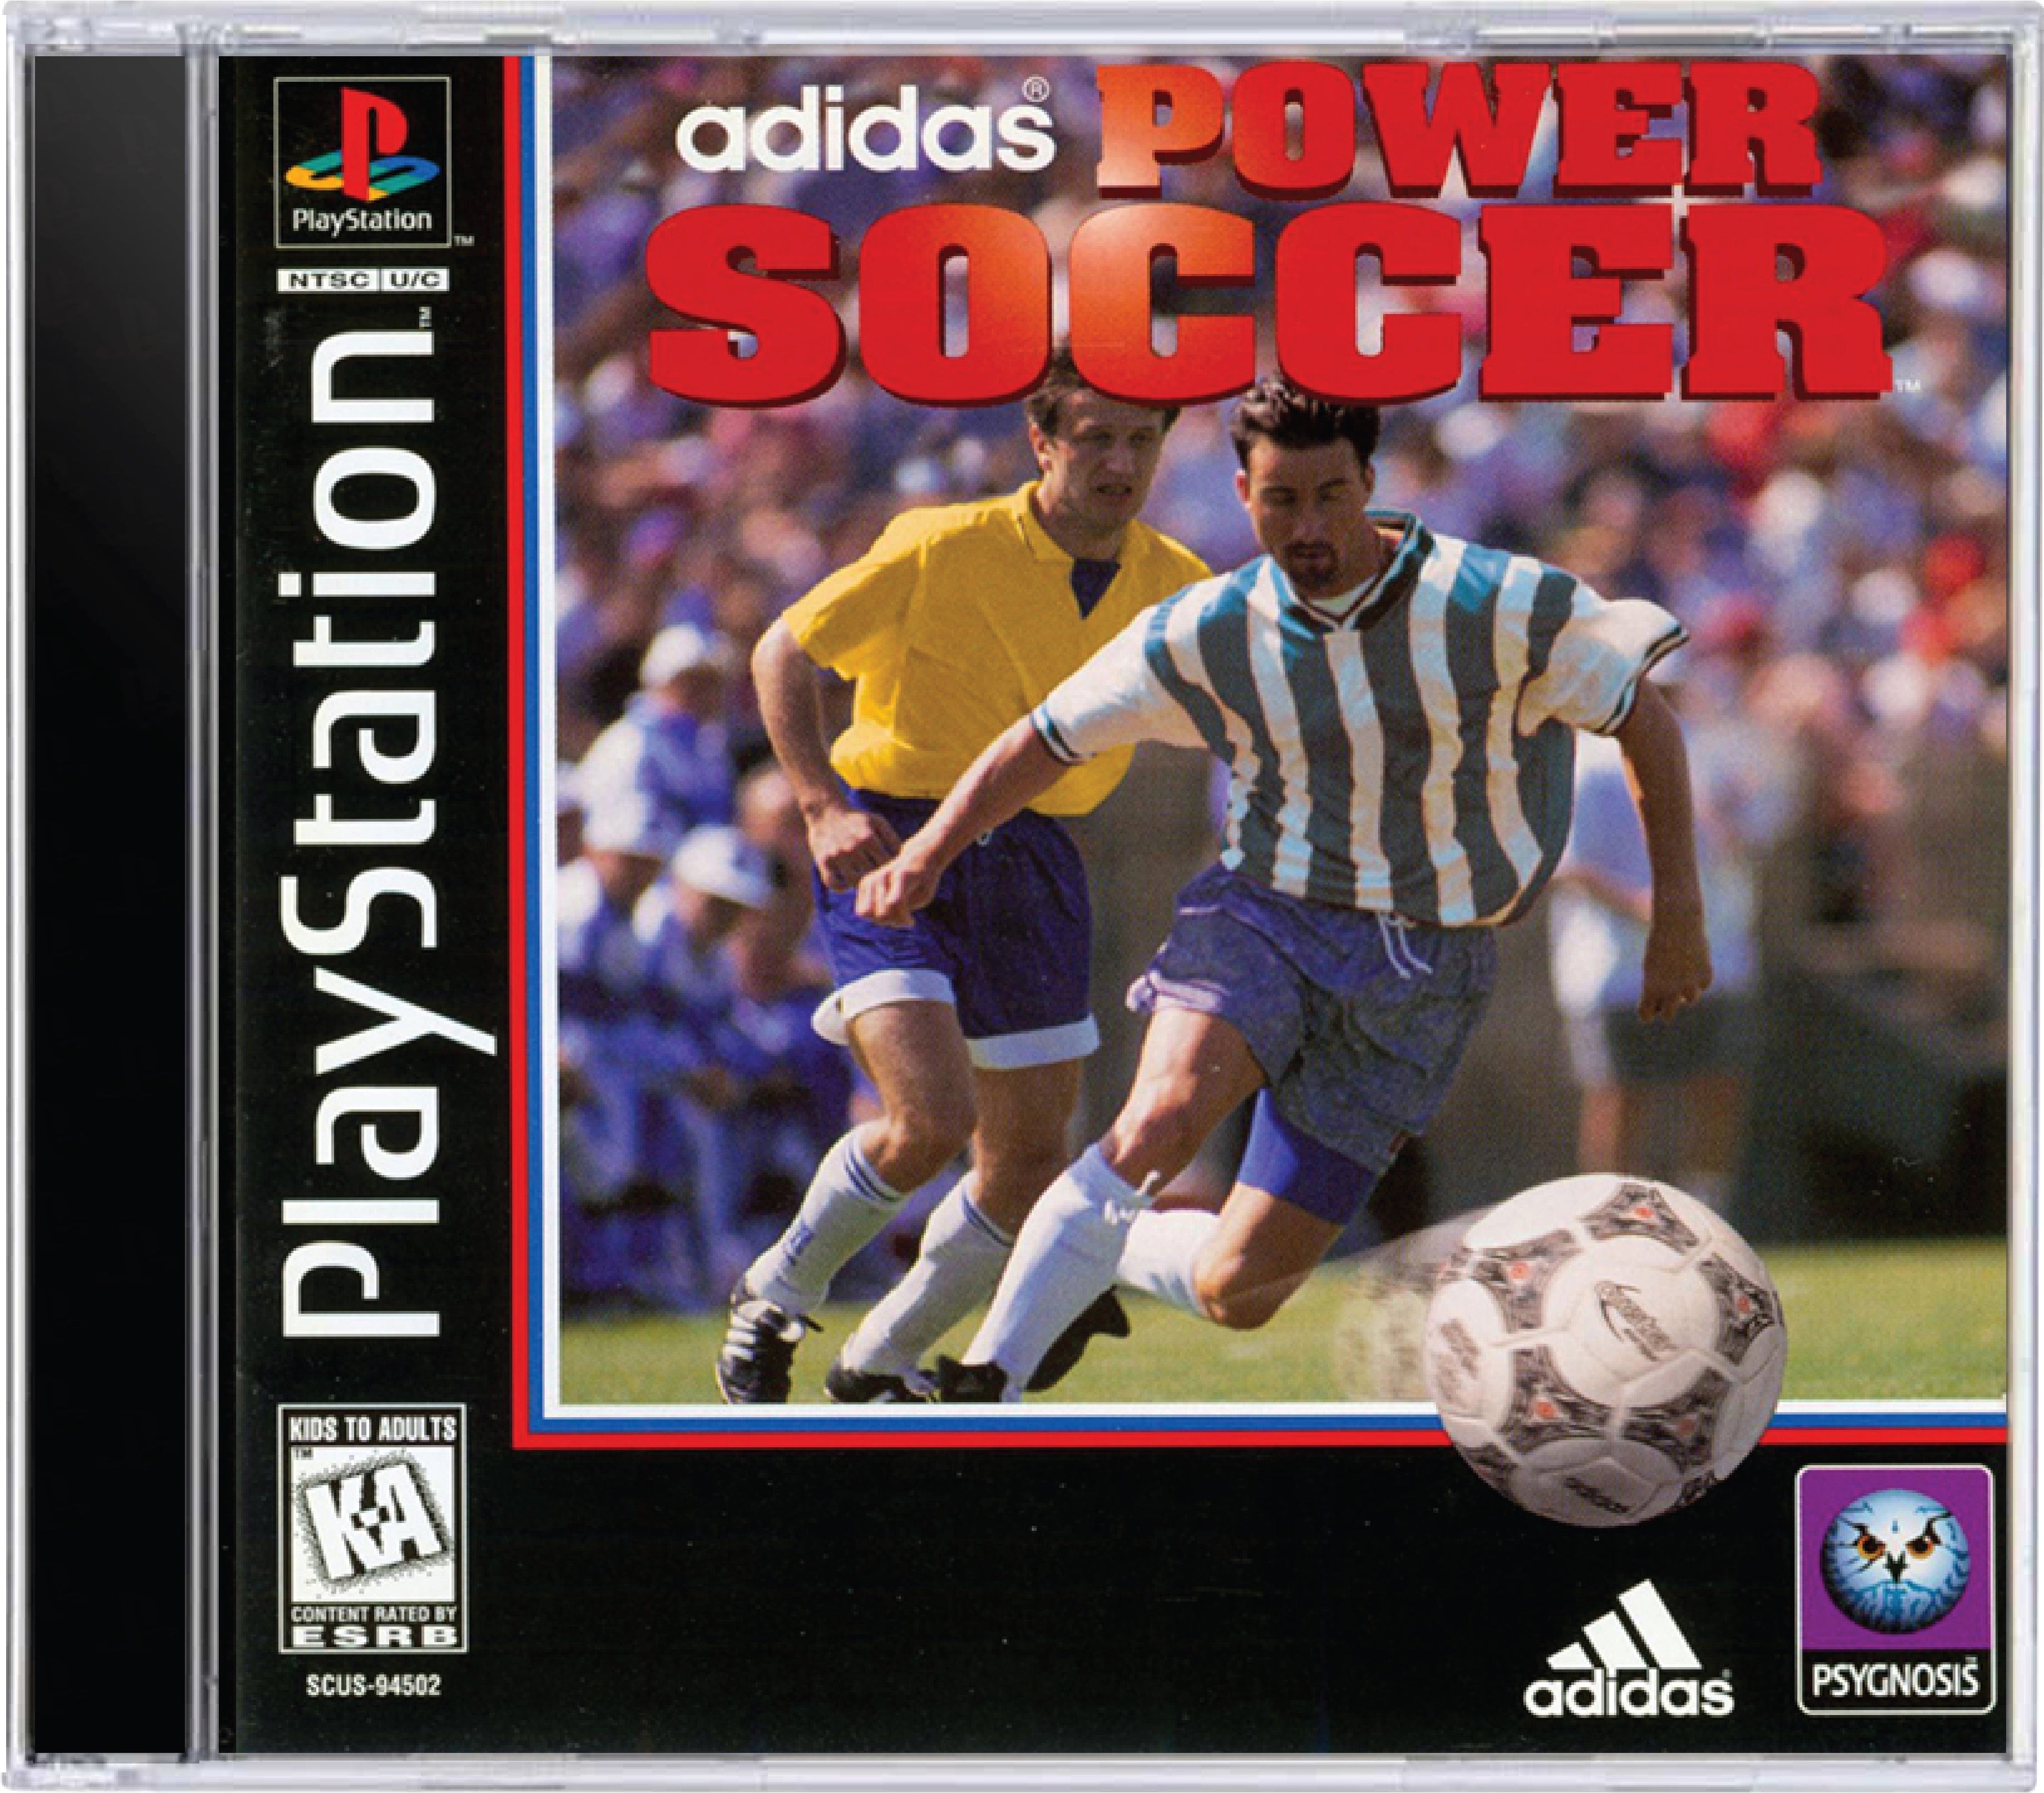 Adidas Power Soccer Cover Art and Product Photo